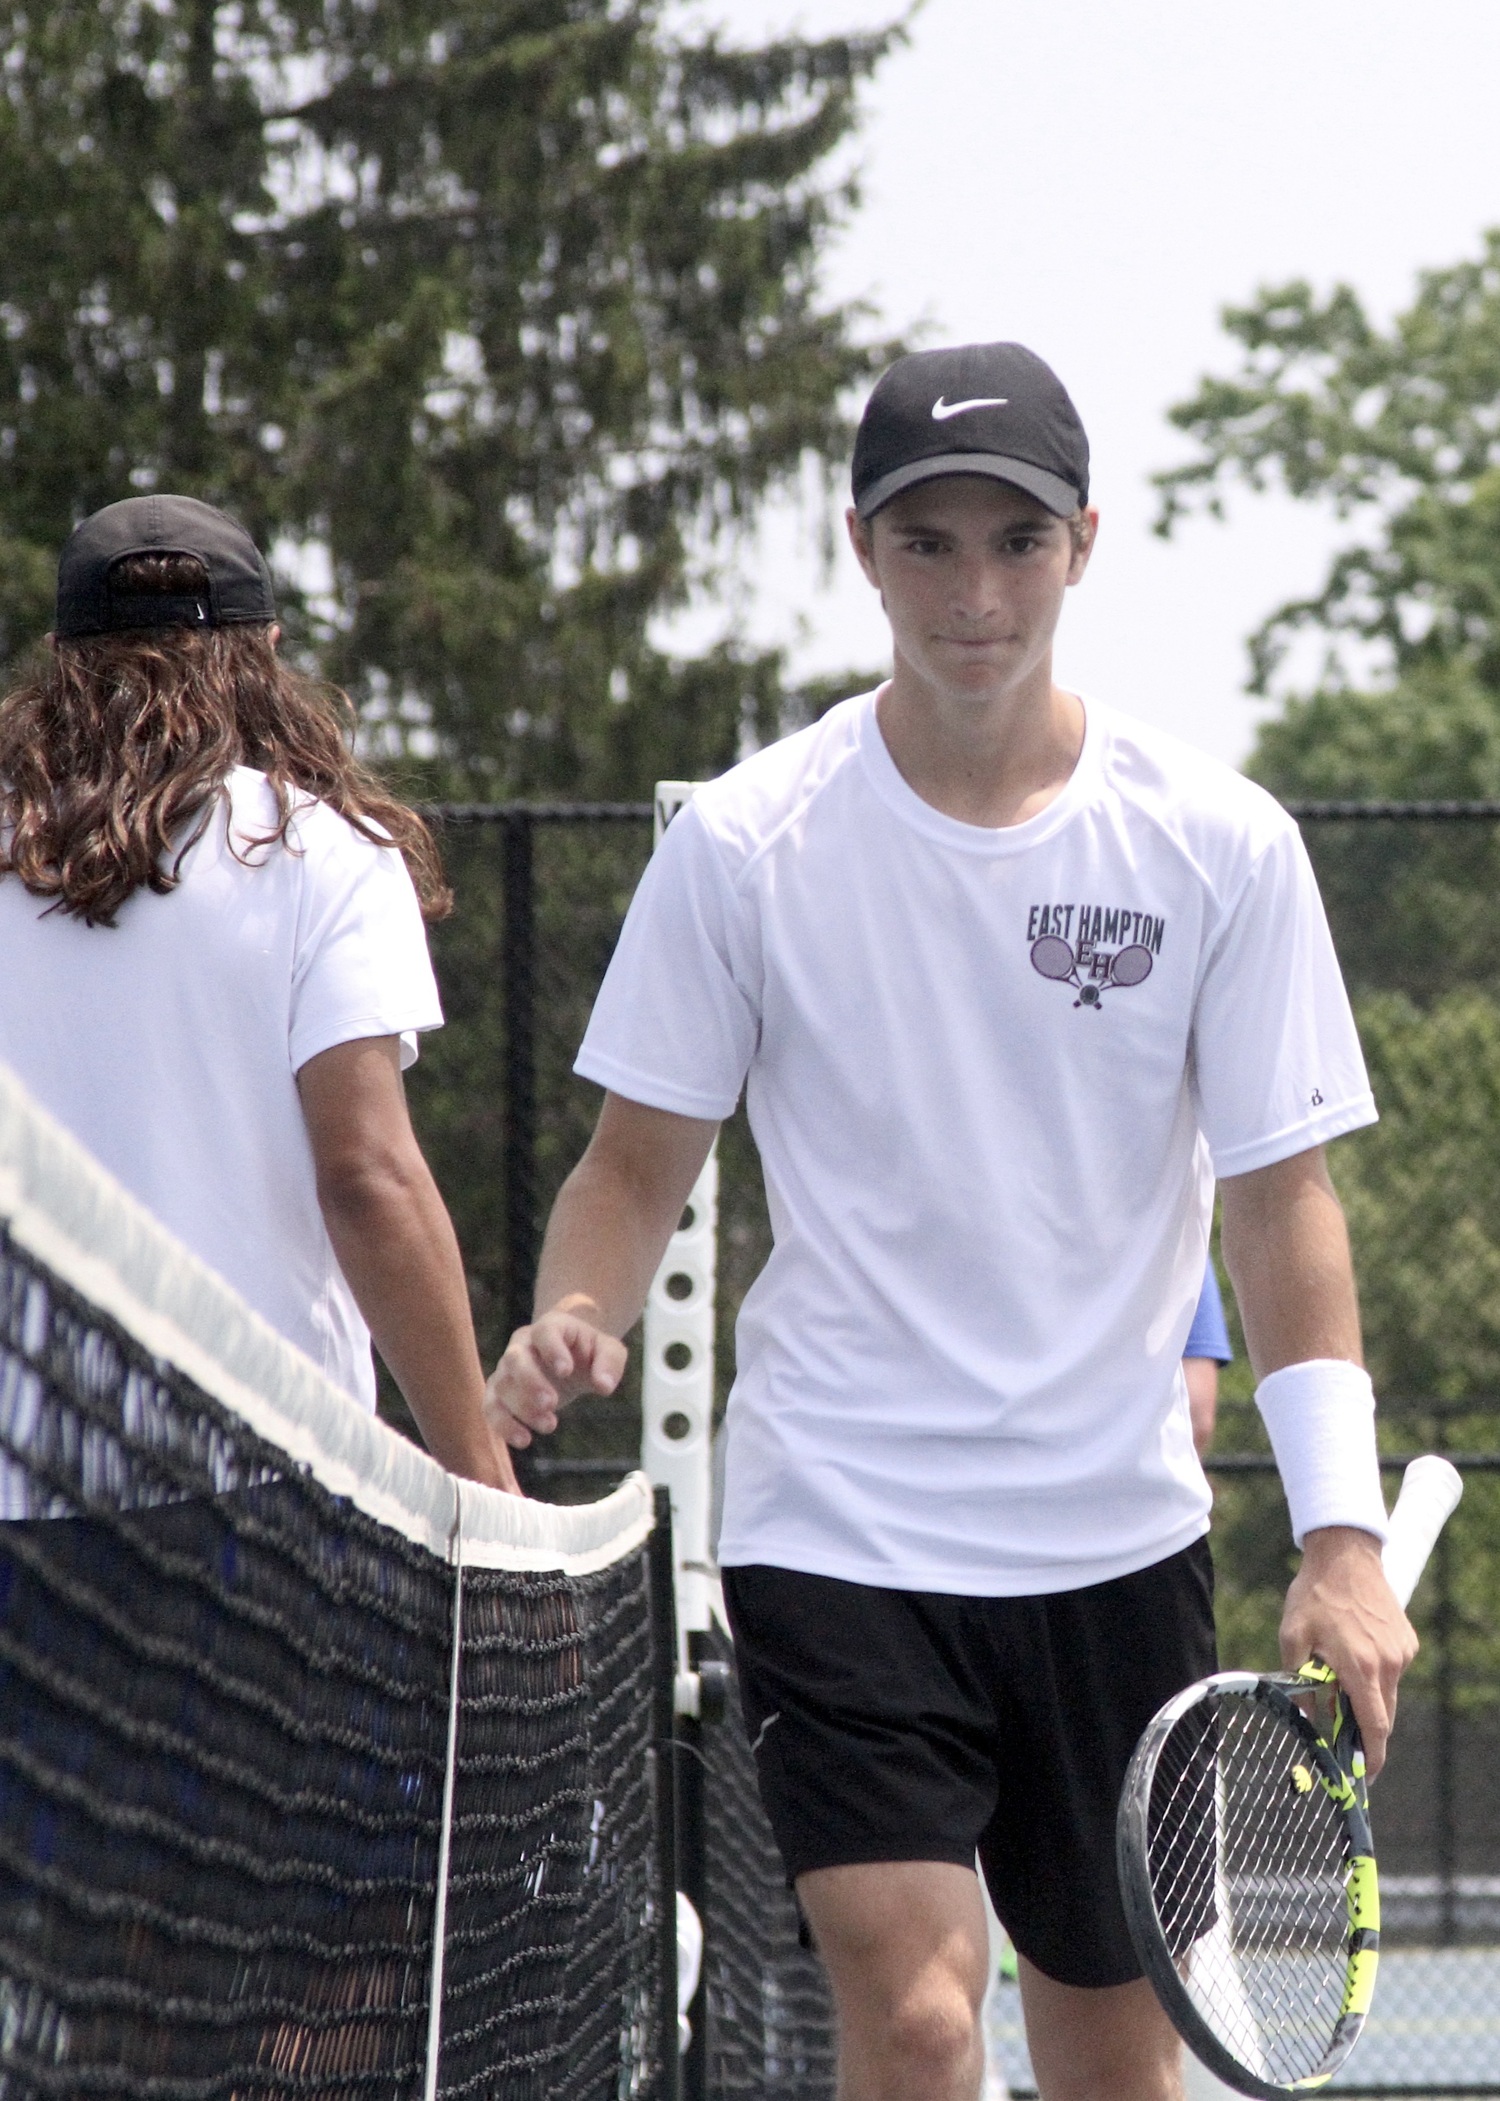 East Hampton senior Max Astilean is all smiles after shaking hands with his Comsewogue opponent following his Suffolk County quarterfinals win. DESIRÉE KEEGAN